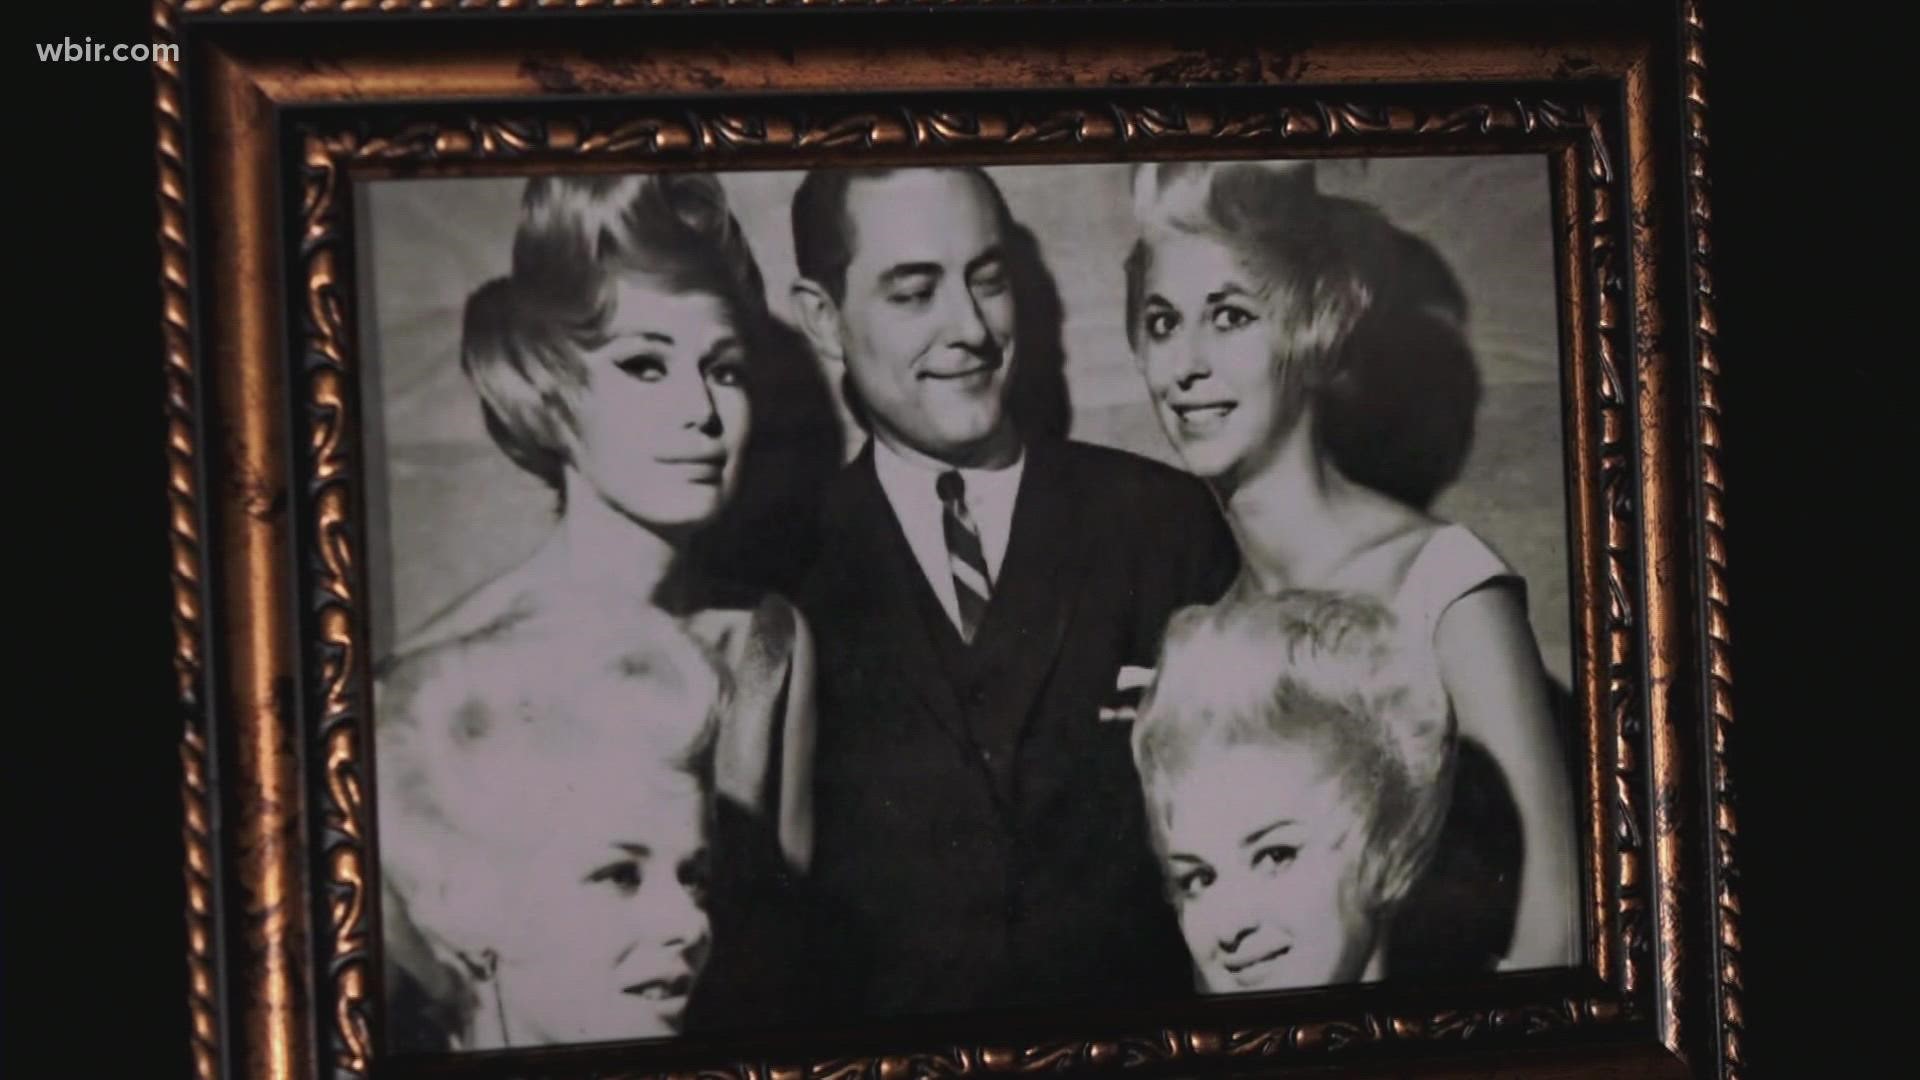 Joseph Weir, who gained an international reputation in the 1950s, '60 and '70s for his hairstyles, was stabbed to death at his West Knox County home in 1983.